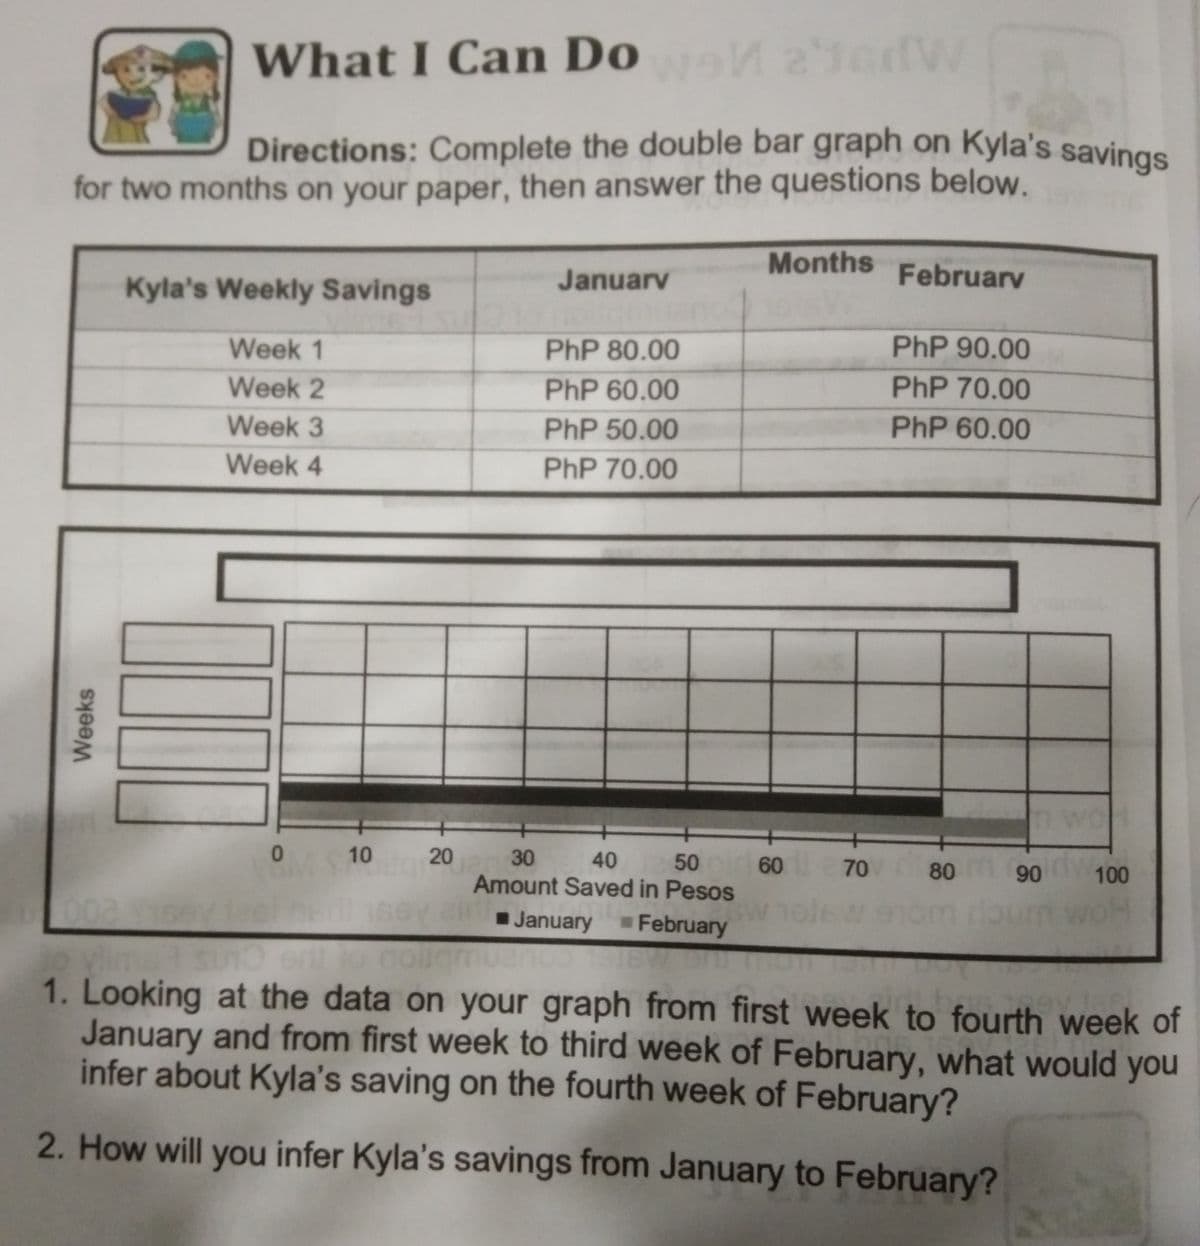 Directions: Complete the double bar graph on Kyla's savings
What I Can Do 2edW
Directions: Complete the double bar graph on Kyla's savings
for two months on your paper, then answer the questions below.
Januarv
Months
February
Kyla's Weekly Savings
Week 1
PhP 80.00
PhP 90.00
Week 2
PhP 60.00
PhP 70.00
Week 3
PhP 50.00
PhP 60.00
Week 4
PhP 70.00
wo
an 30
Amount Saved in Pesos
10
20
40
50 60 70 80 90 100
000
January
February
nour
1. Looking at the data on your graph from first week to fourth week of
January and from first week to third week of February, what would you
infer about Kyla's saving on the fourth week of February?
2. How will you infer Kyla's savings from January to February?
Weeks
